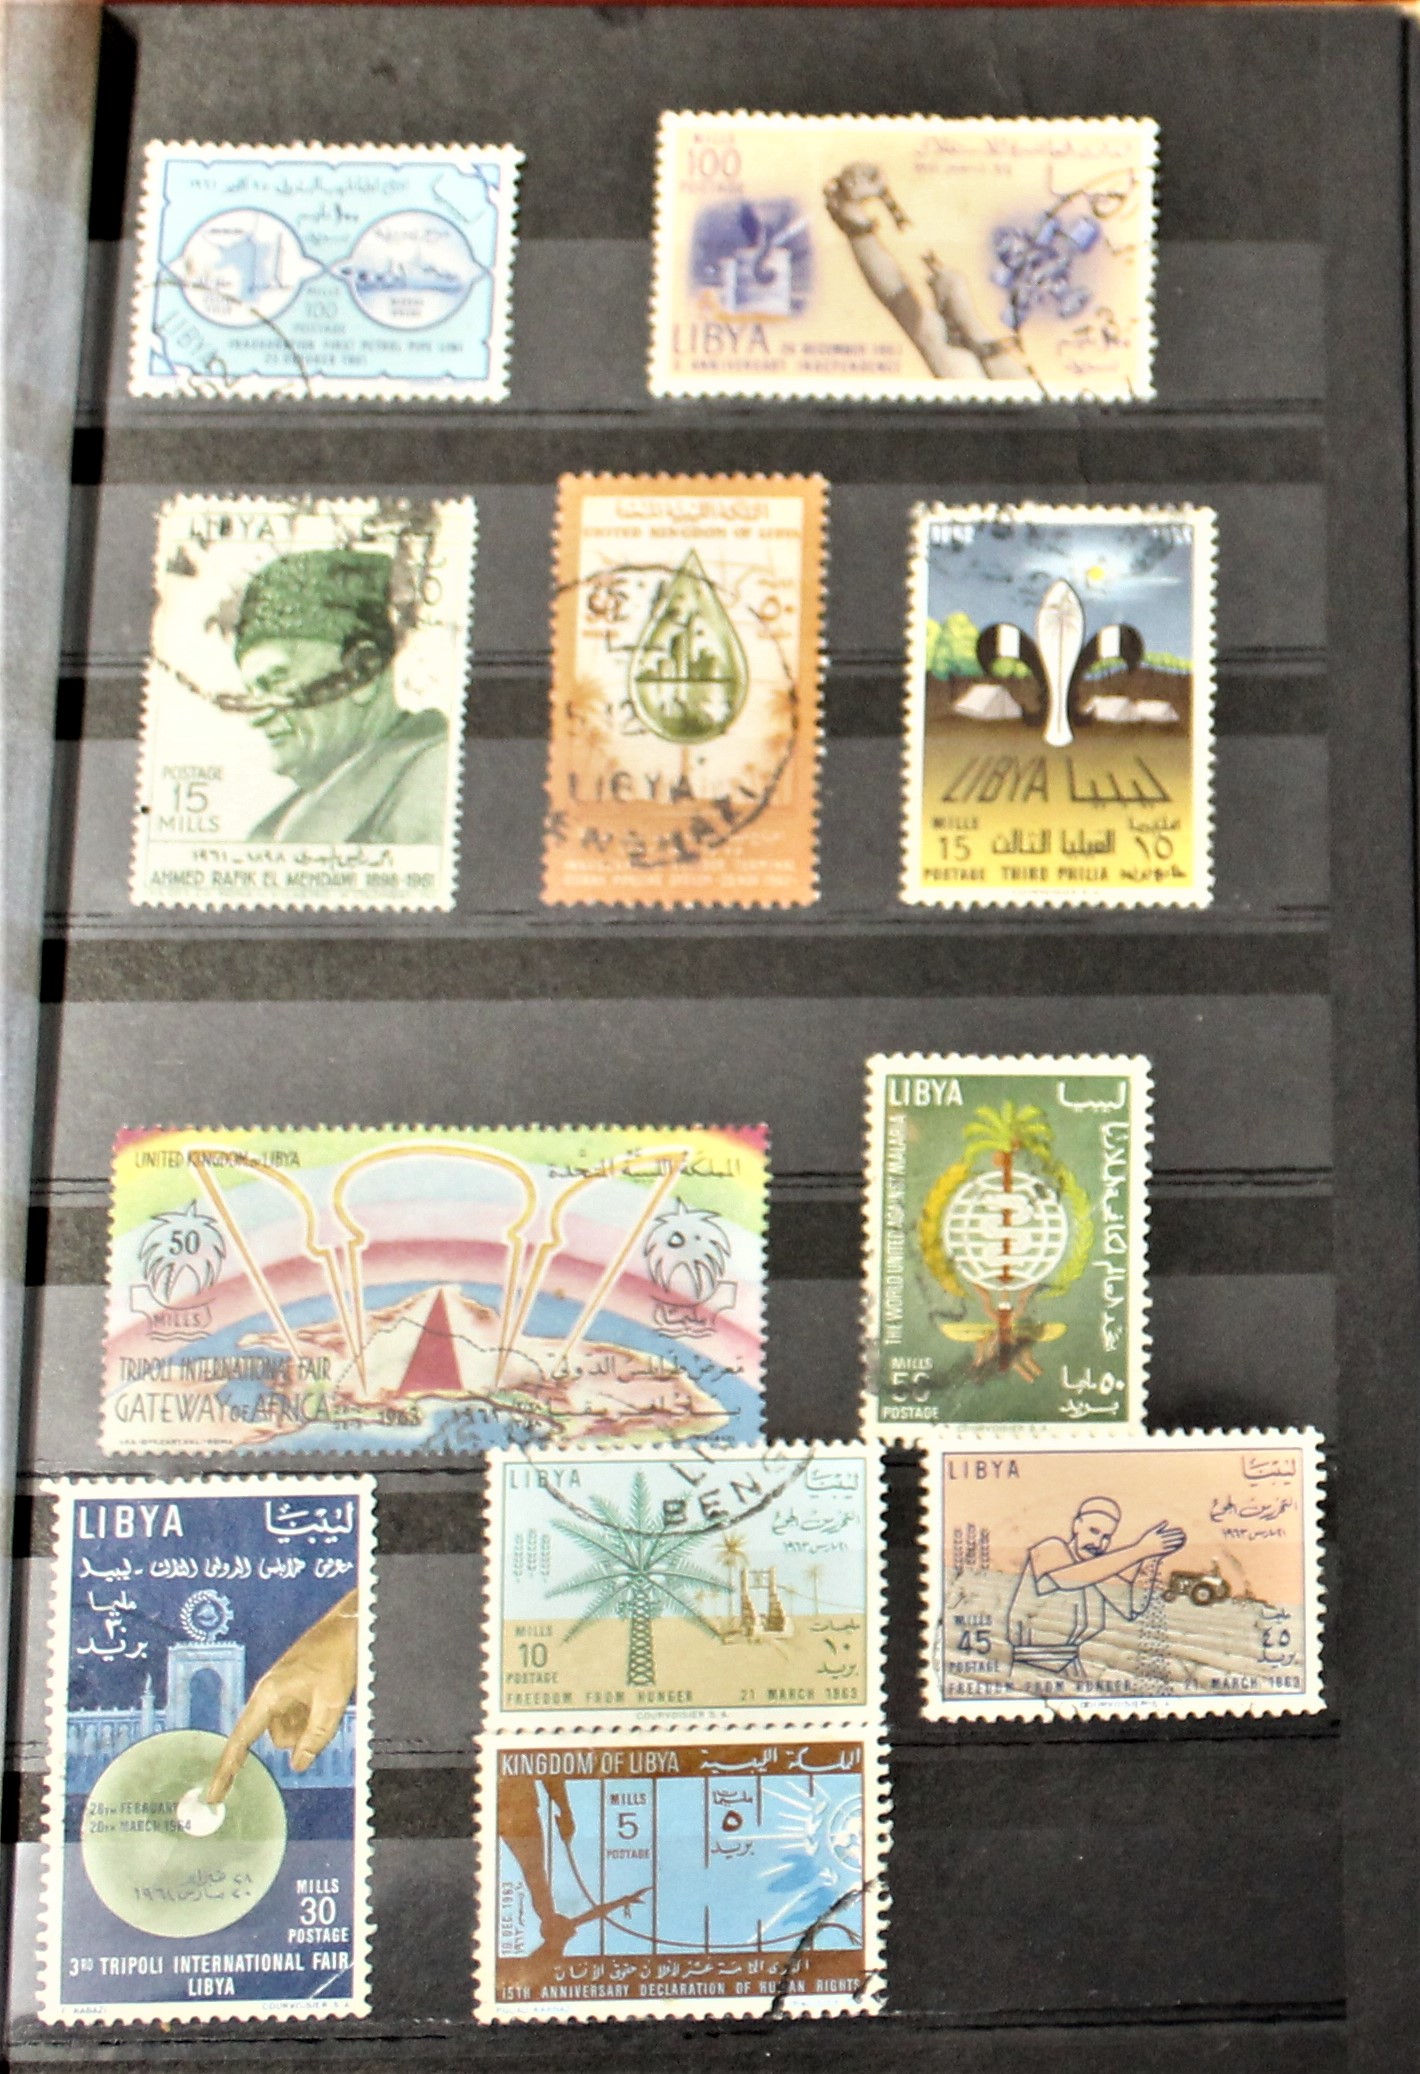 Libya 1951-1984 small stock book of u/m, m/m or used stamps. Cat value £76.90 - Image 4 of 4